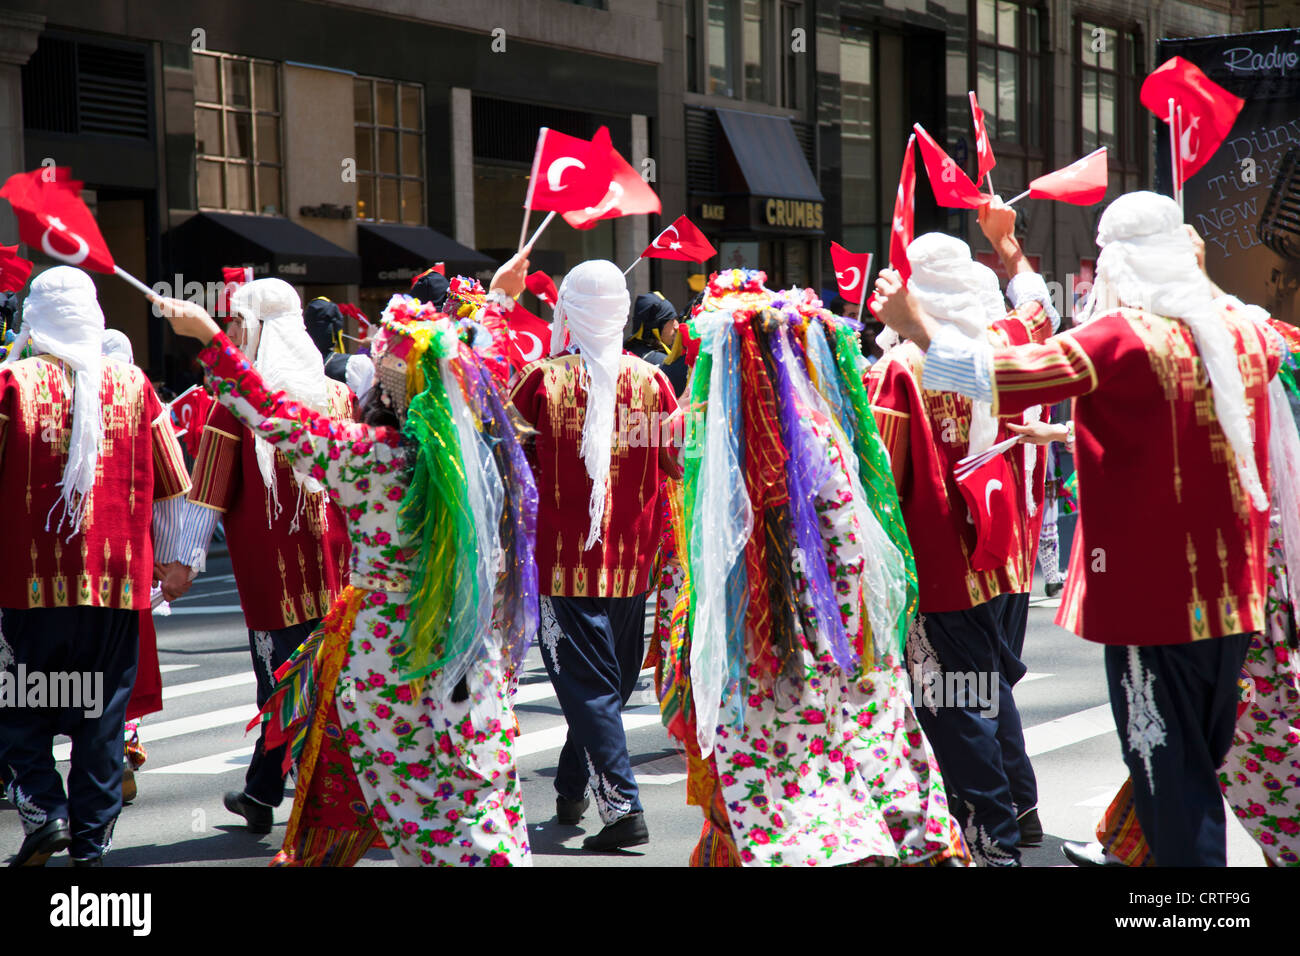 Turkish parade in New York city, Manhattan Turks with flags and